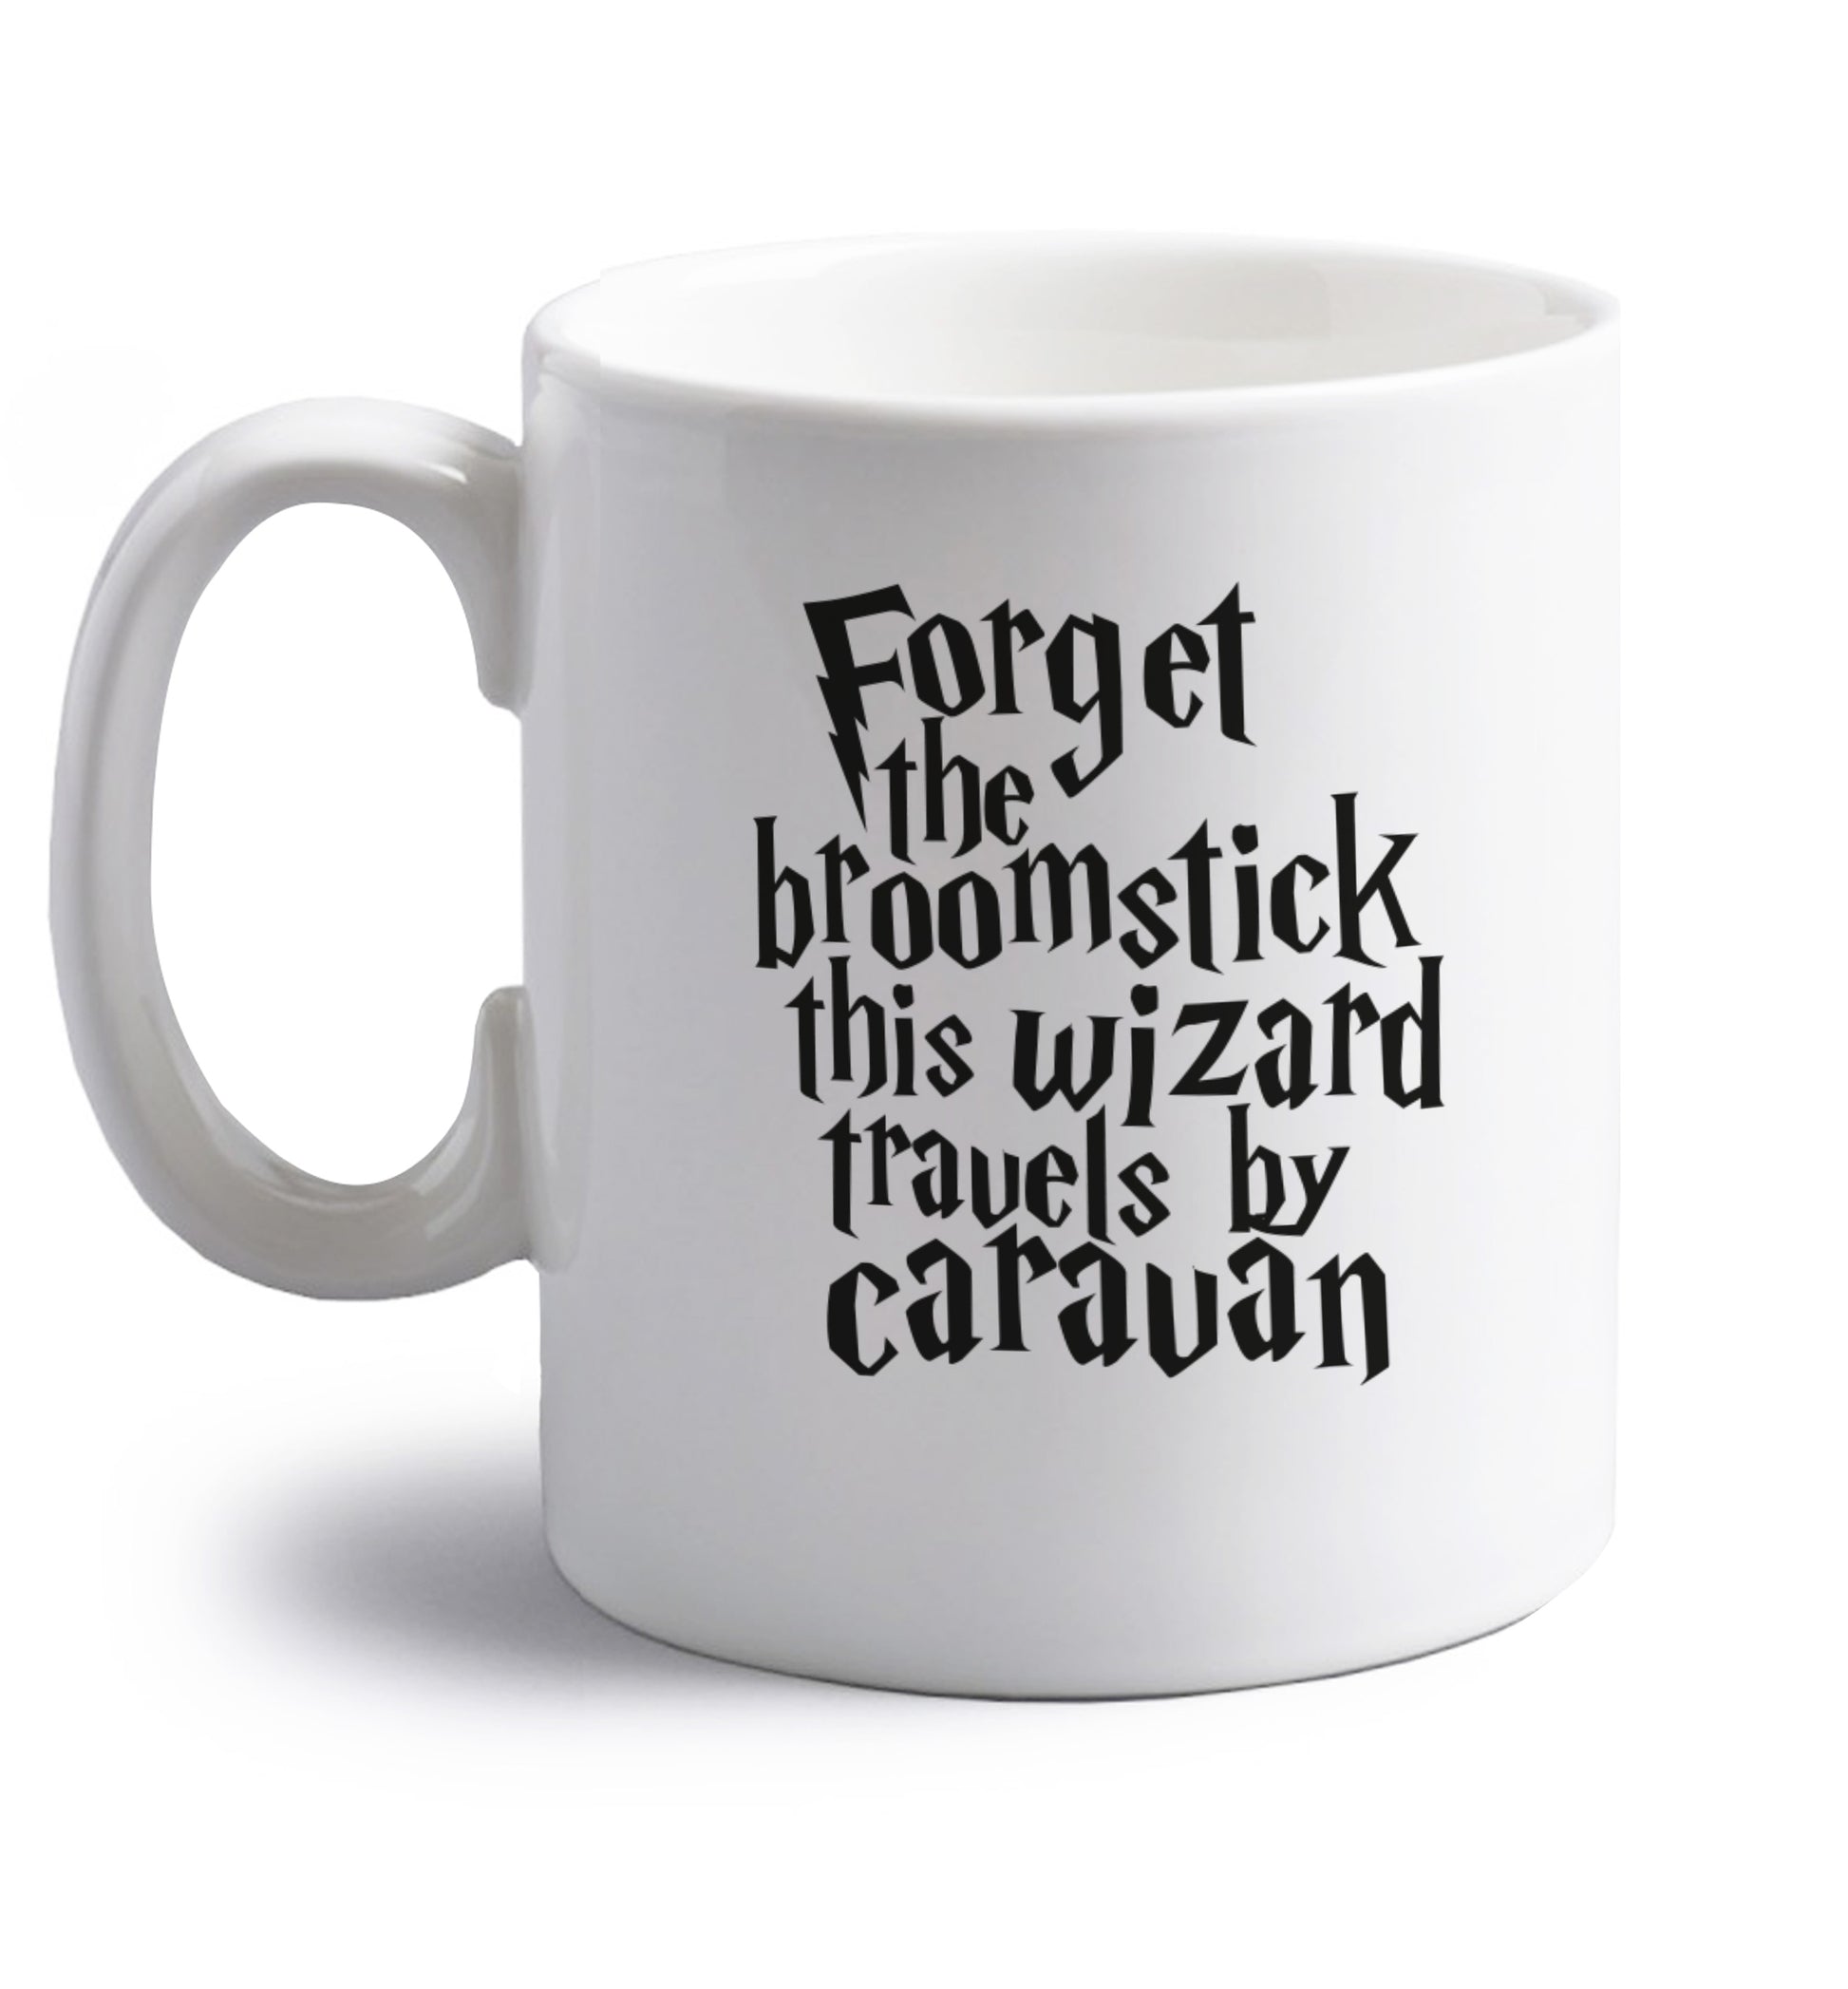 Forget the broomstick this wizard travels by caravan right handed white ceramic mug 